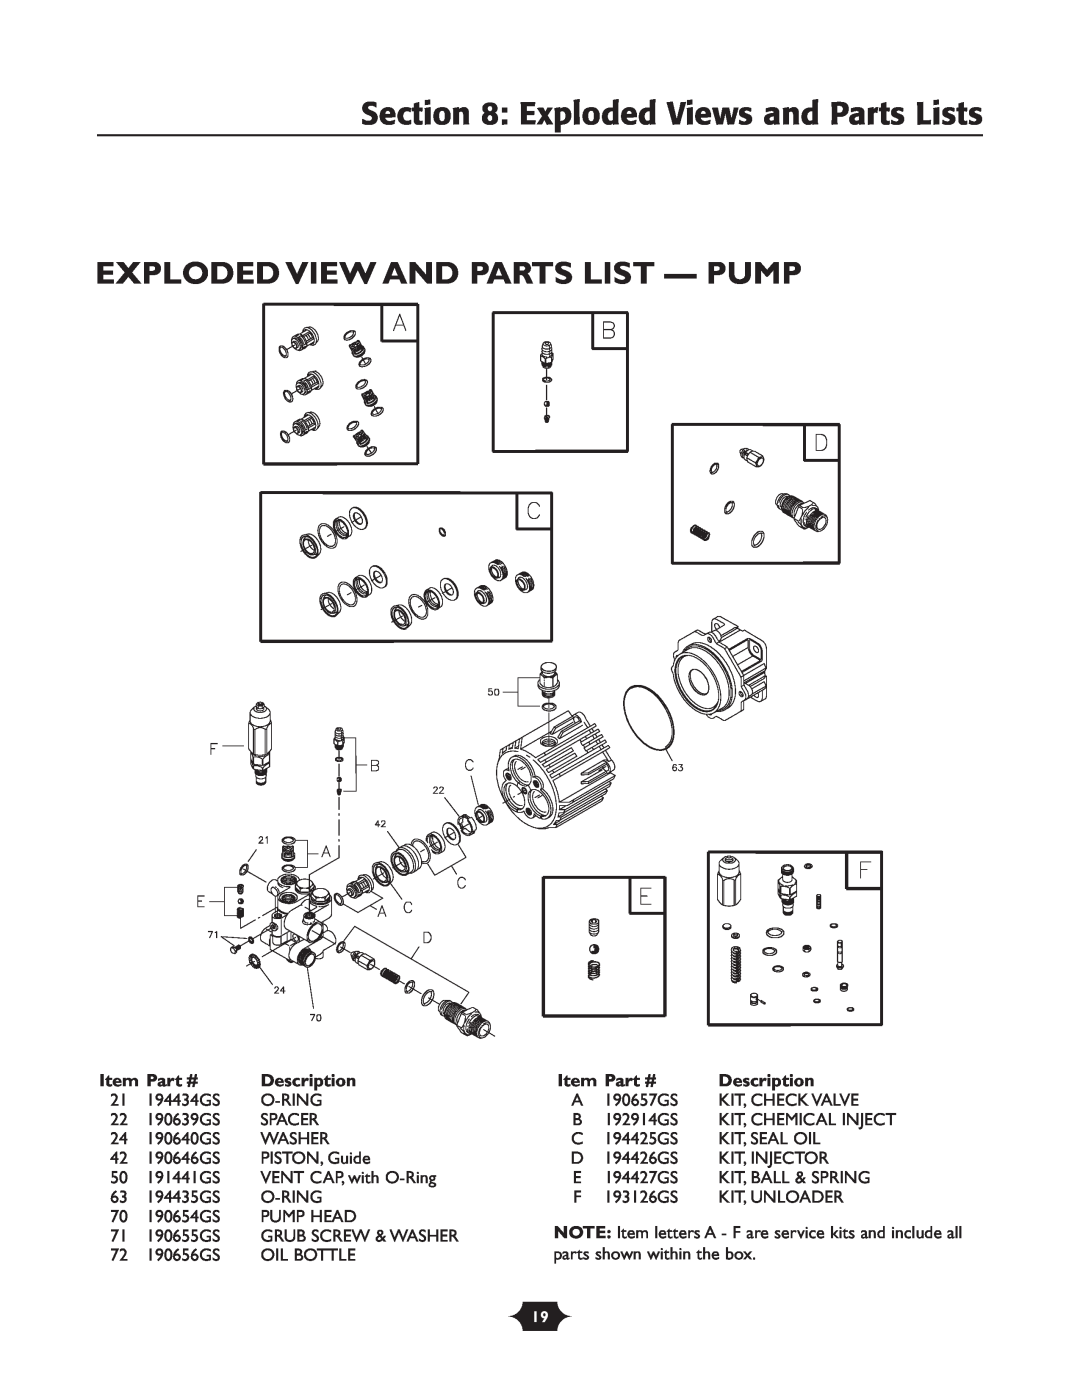 Briggs & Stratton 20209 owner manual Exploded Views and Parts Lists, Exploded View And Parts List - Pump, Description 